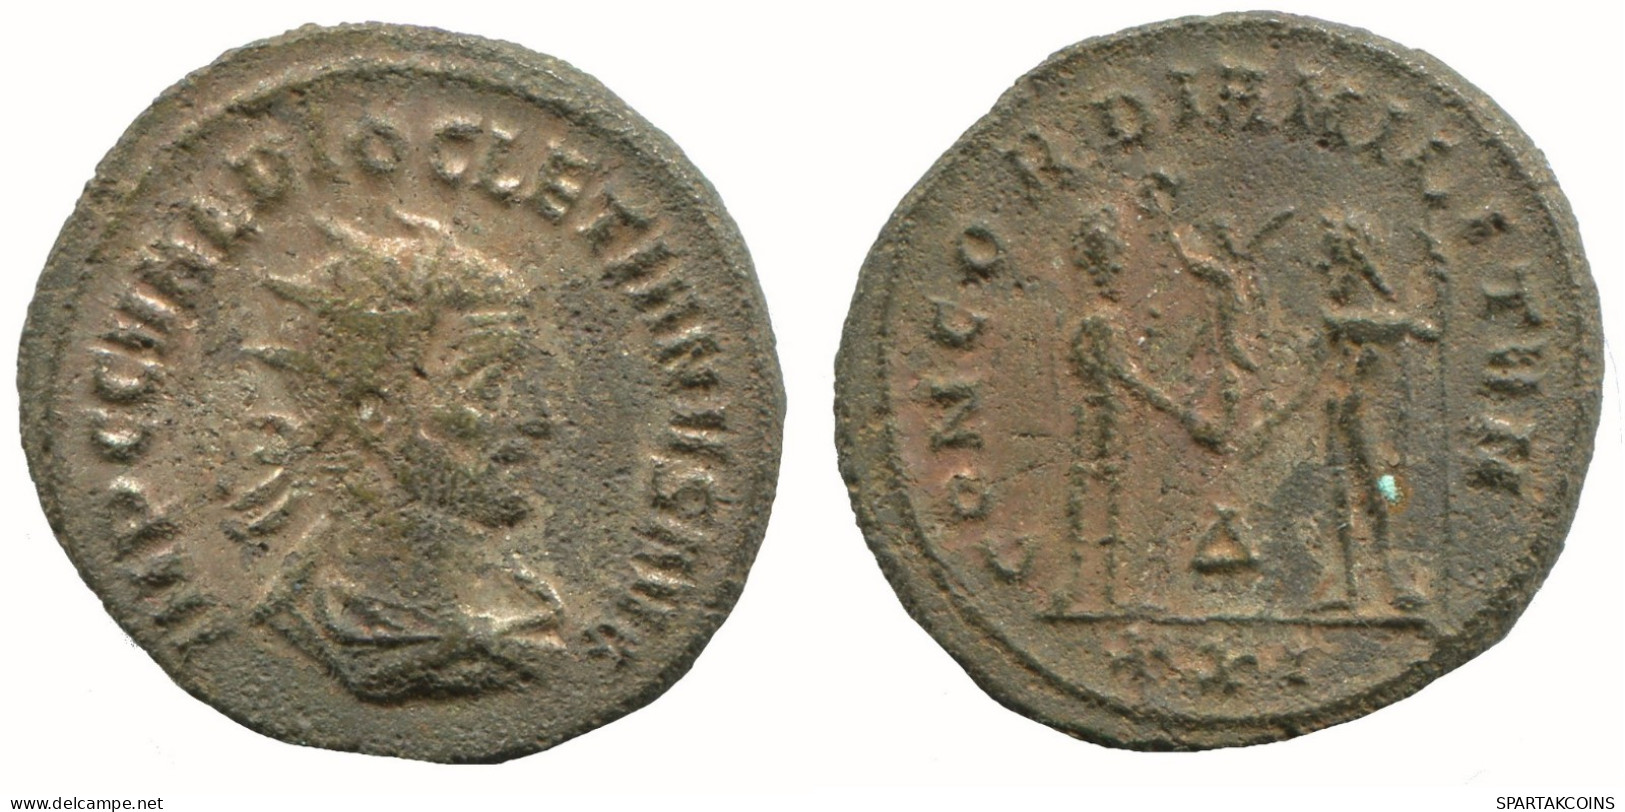 DIOCLETIAN ANTONINIANUS Cyzicus Δ/xxi AD306 Concord 4.8g/21mm #NNN1731.18.D.A - The Tetrarchy (284 AD To 307 AD)